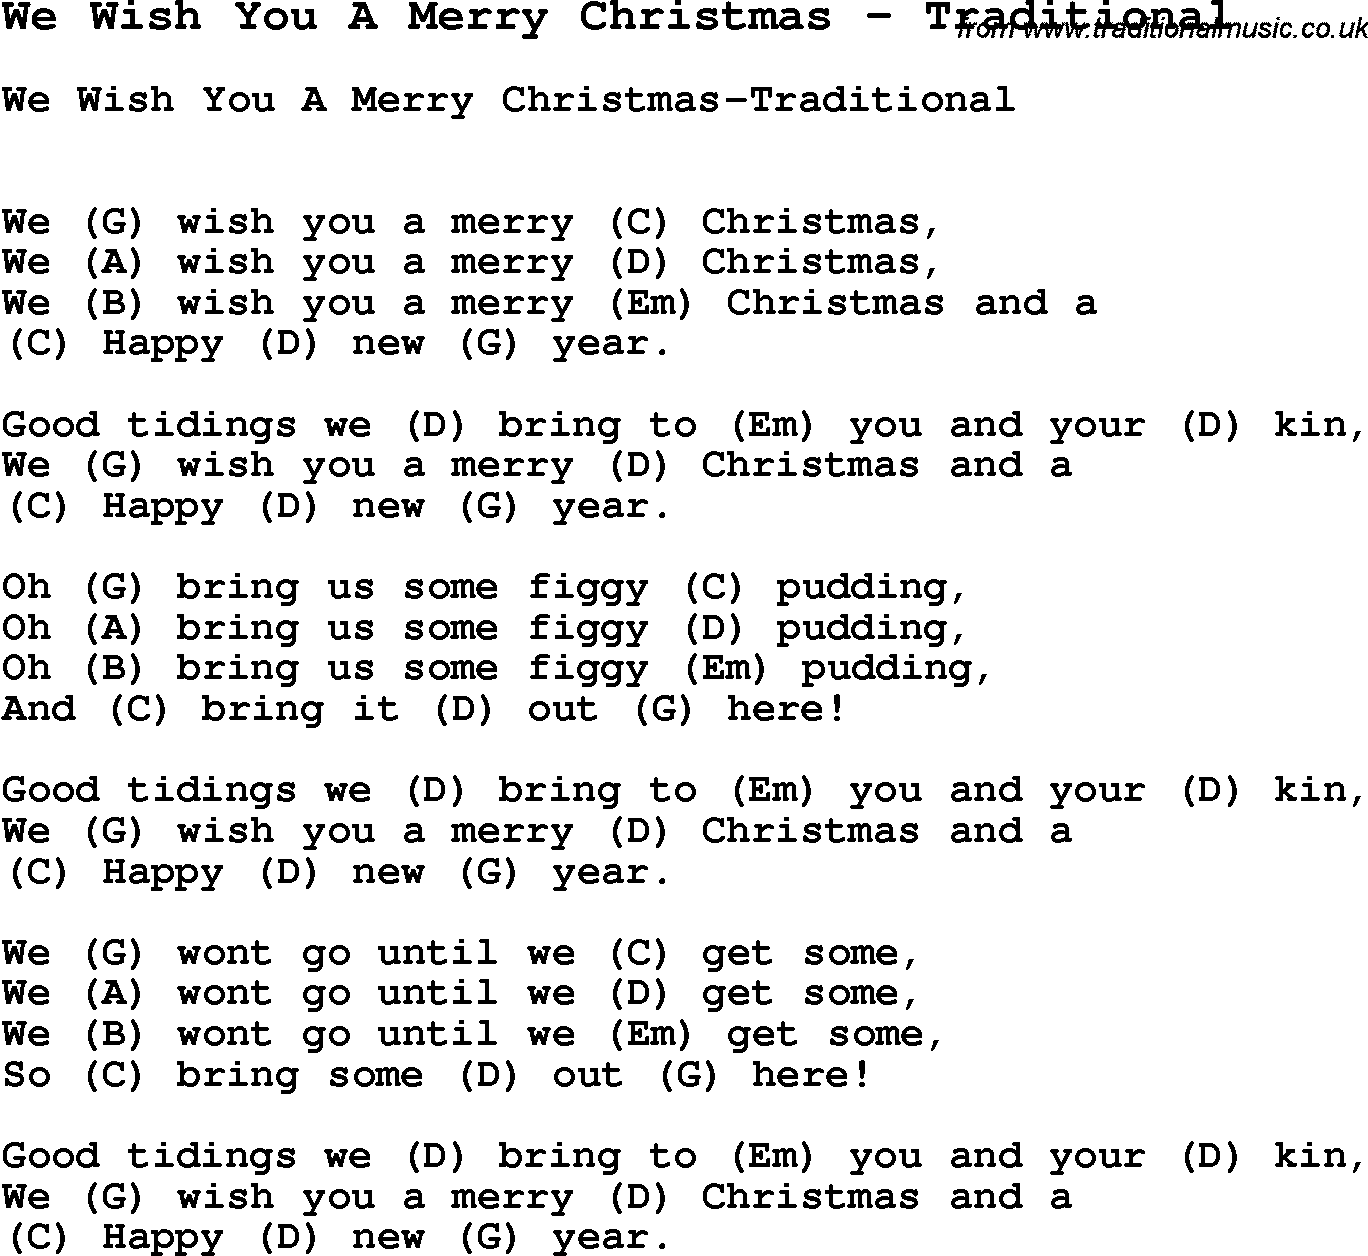 Song We Wish You A Merry Christmas by Traditional, with lyrics for vocal performance and accompaniment chords for Ukulele, Guitar Banjo etc.